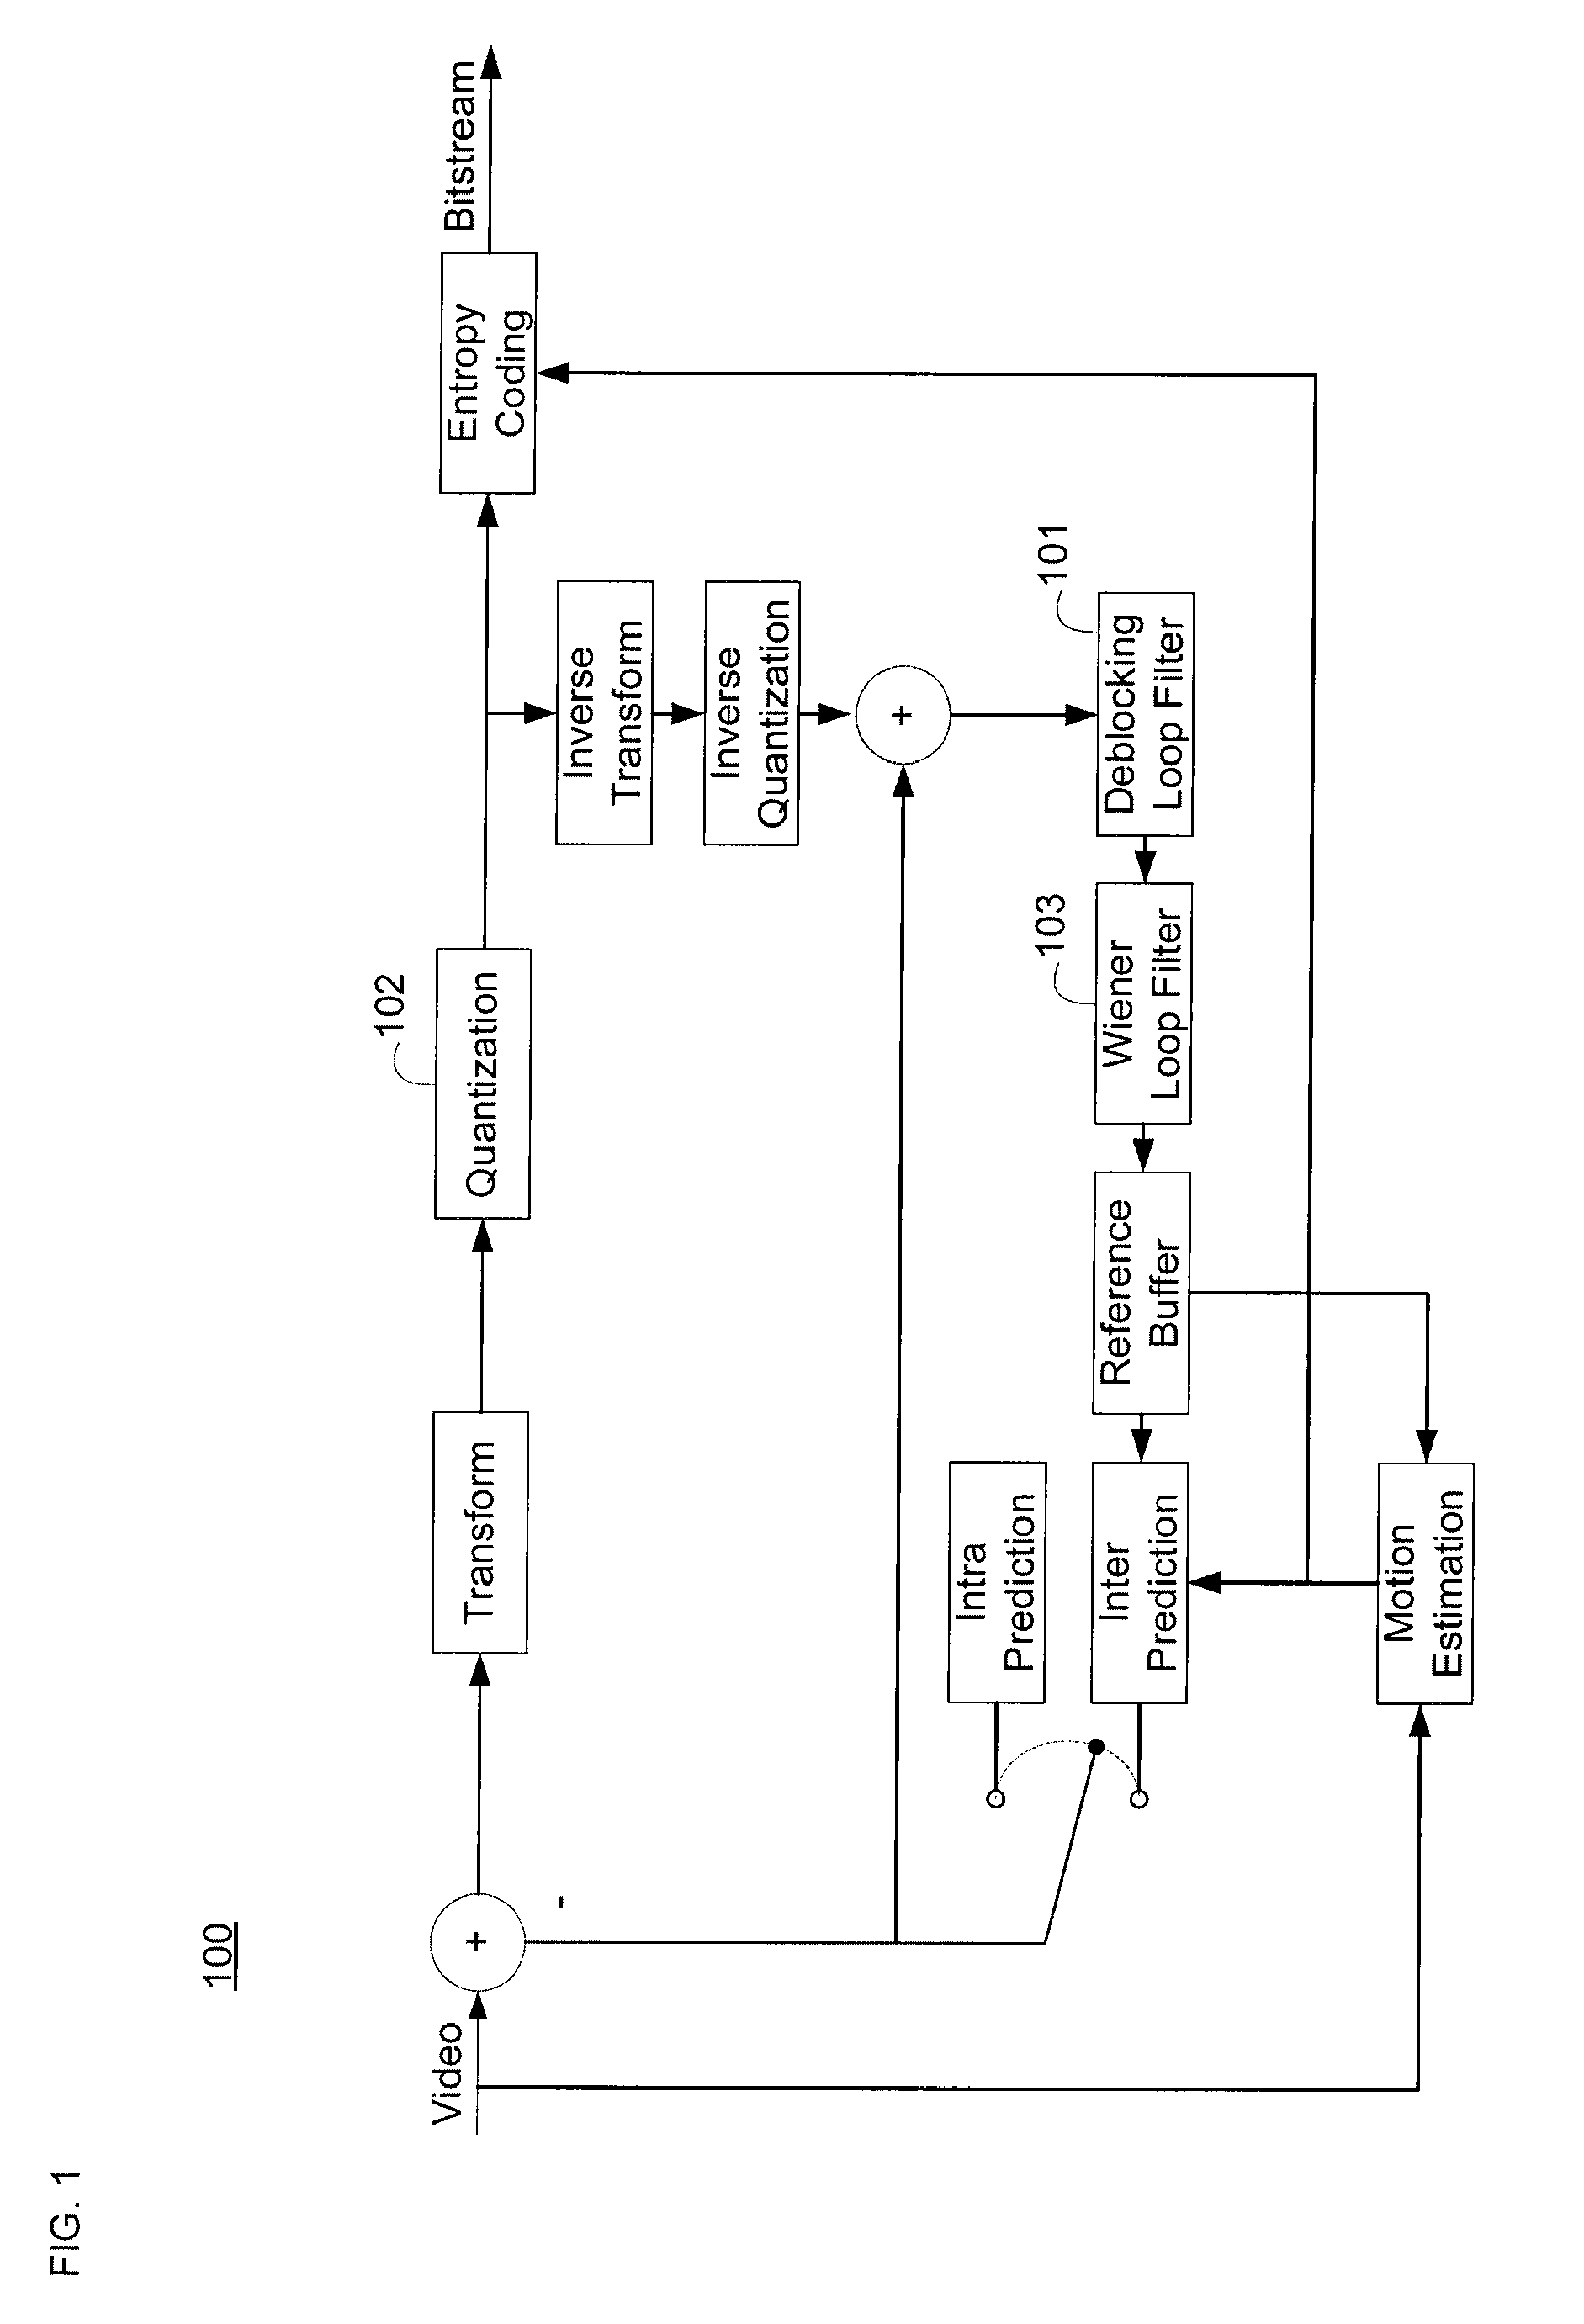 Adaptive loop filtering using tables of filter sets for video coding